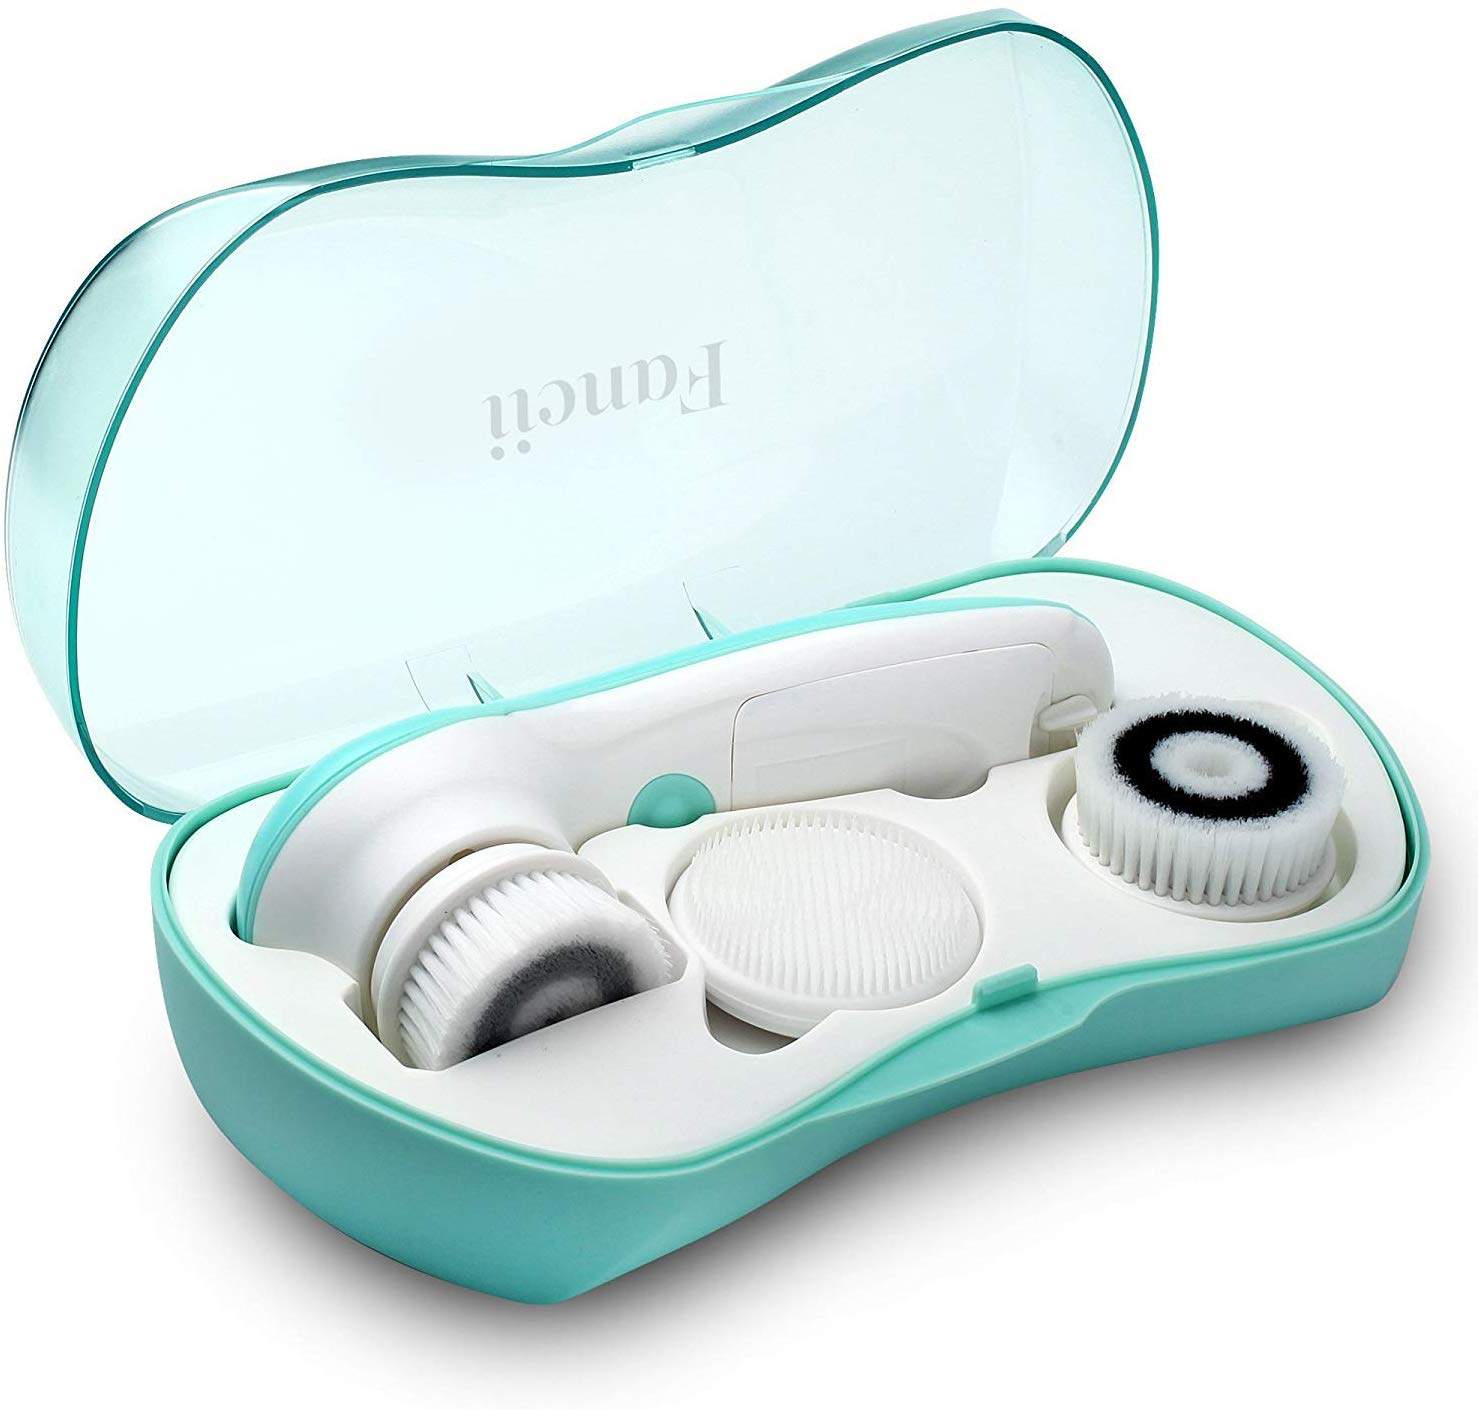 Black Friday Deals: Facial Cleansing Spin Brush Set